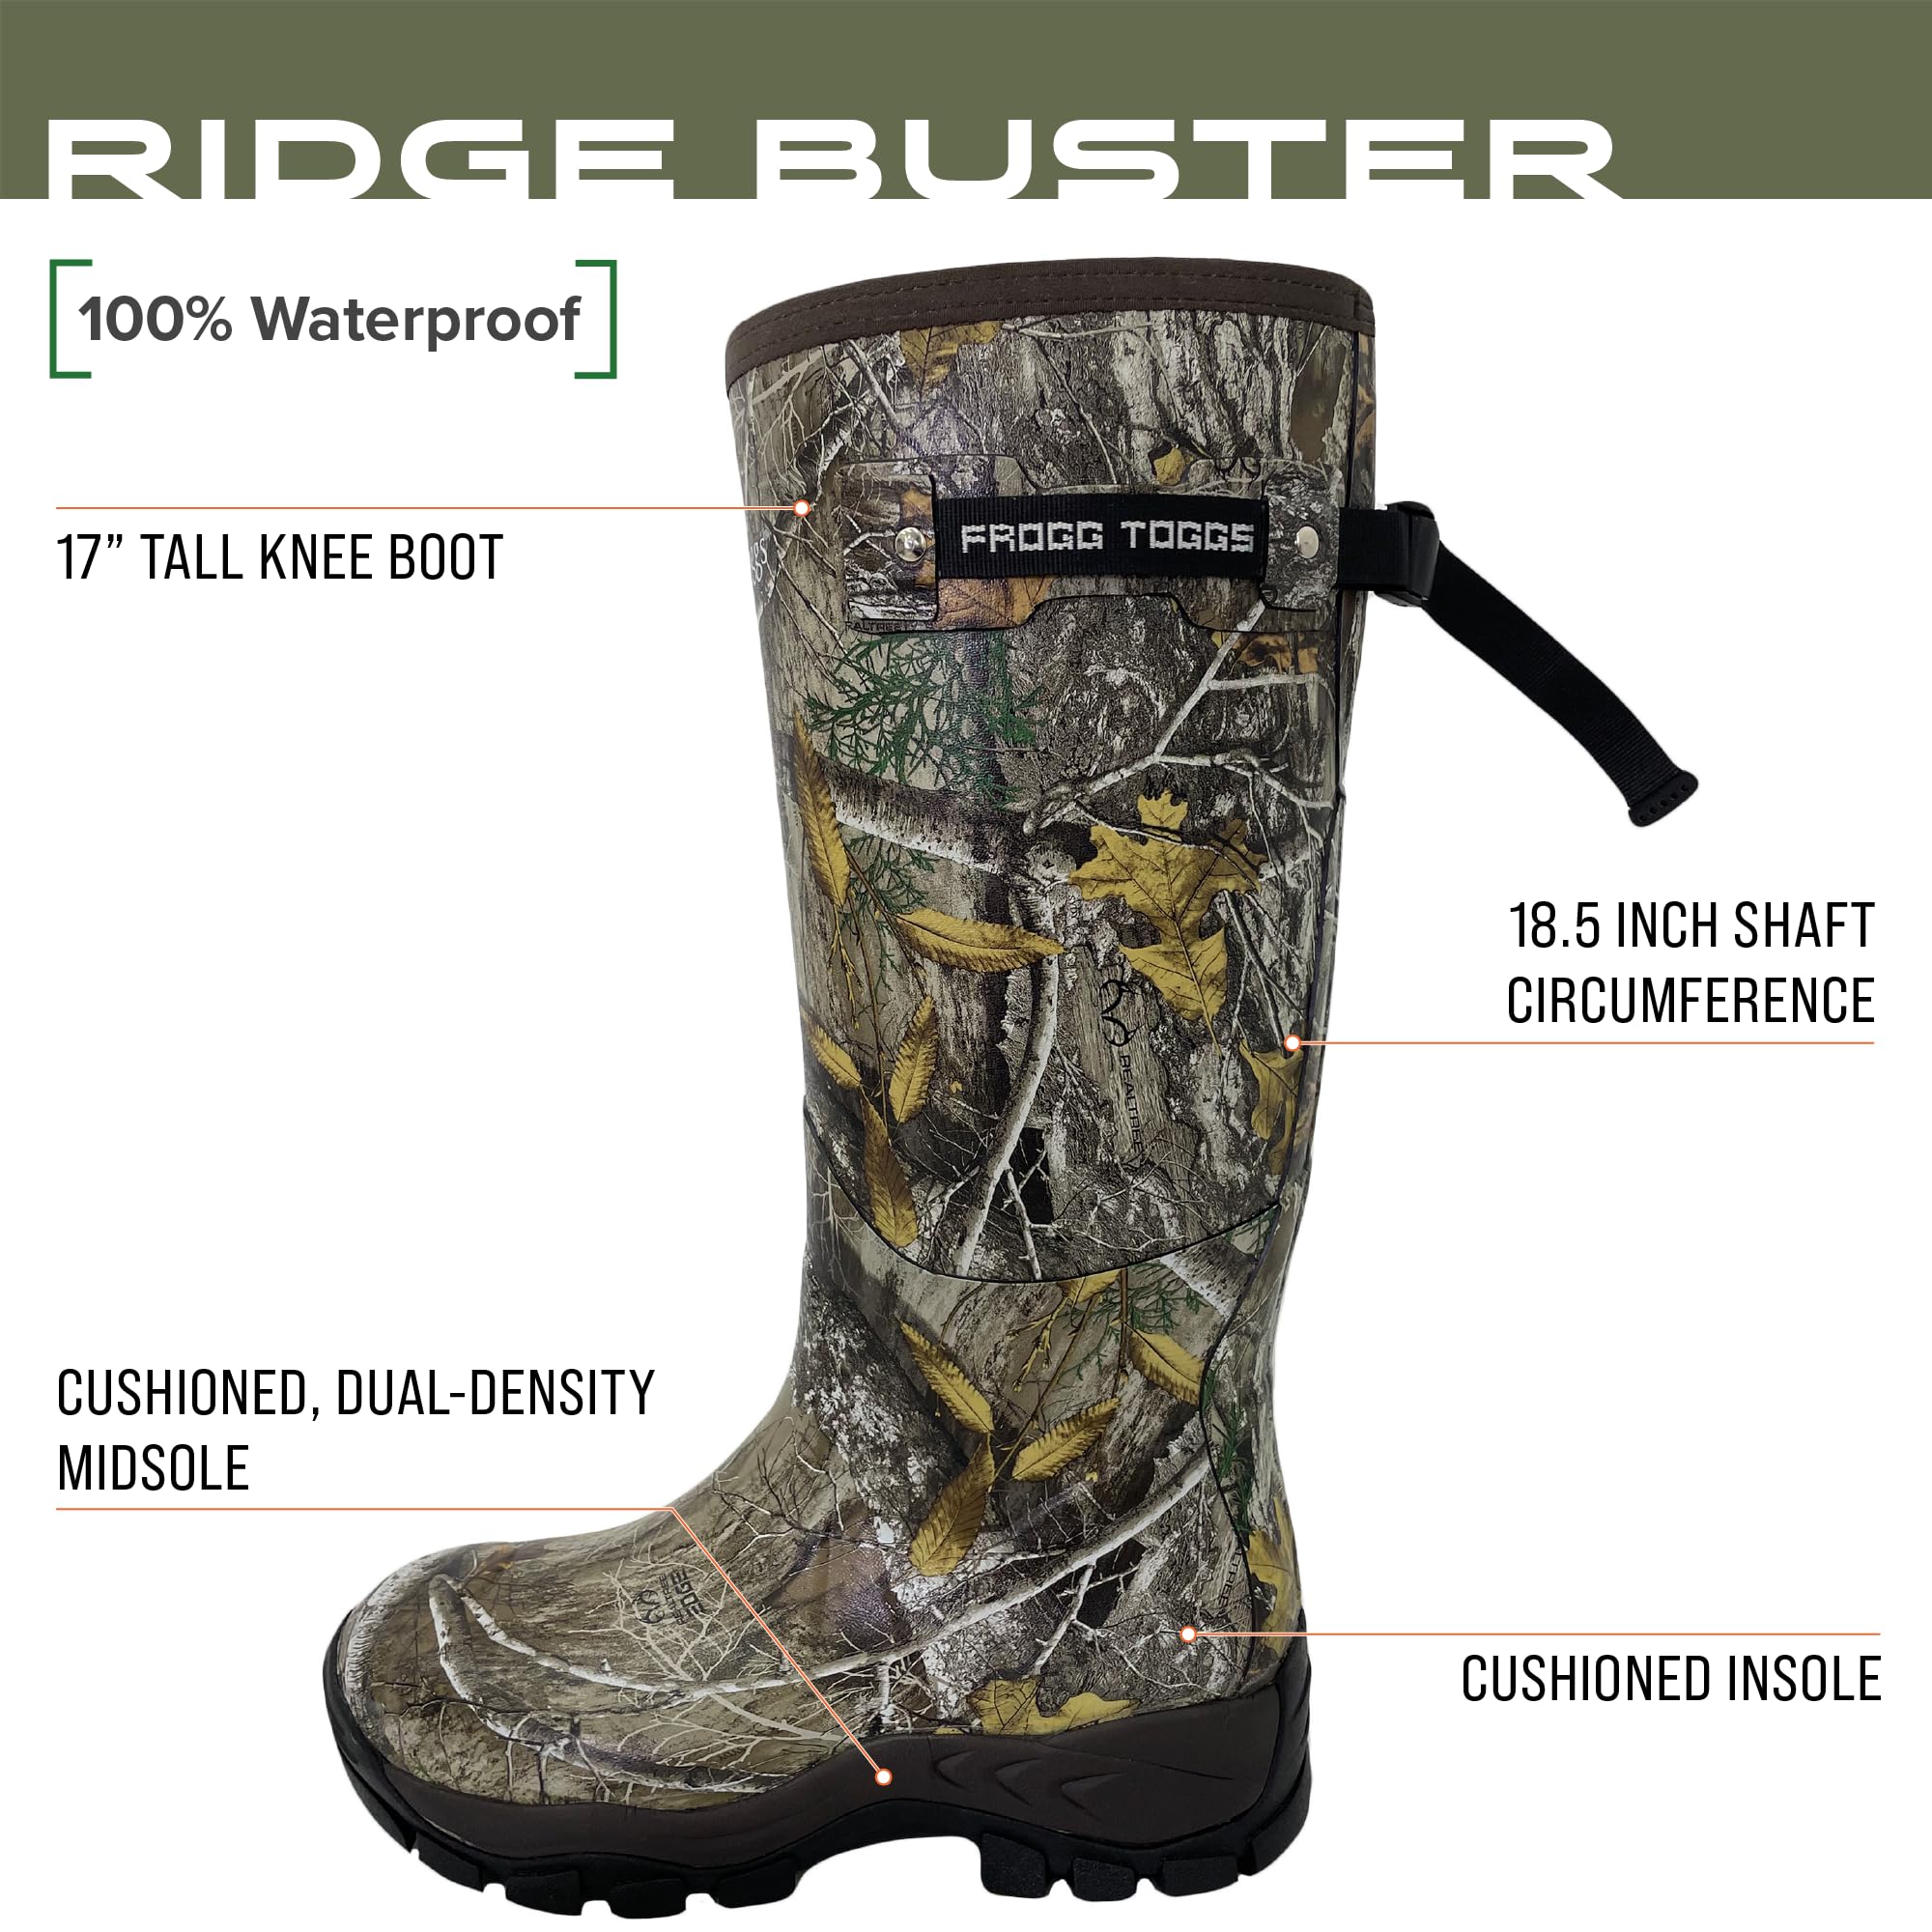 FROGG TOGGS Men's Ridge Buster, Snake Protection in a Rubber, Neoprene Waterproof Boot